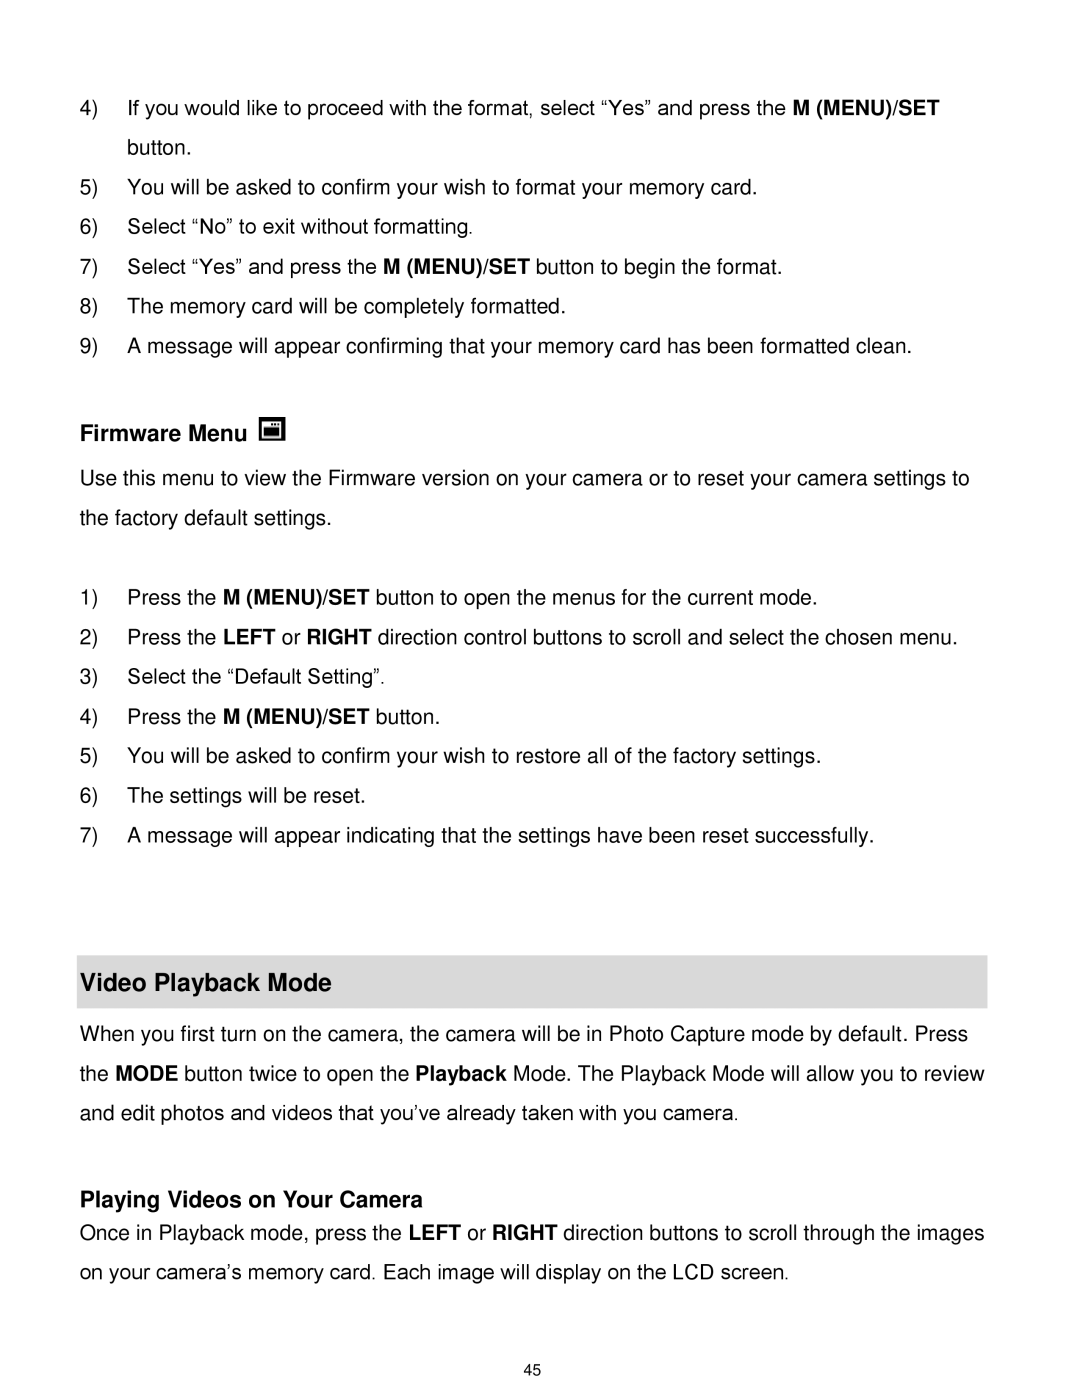 Vivitar S529 user manual Video Playback Mode, Playing Videos on Your Camera 